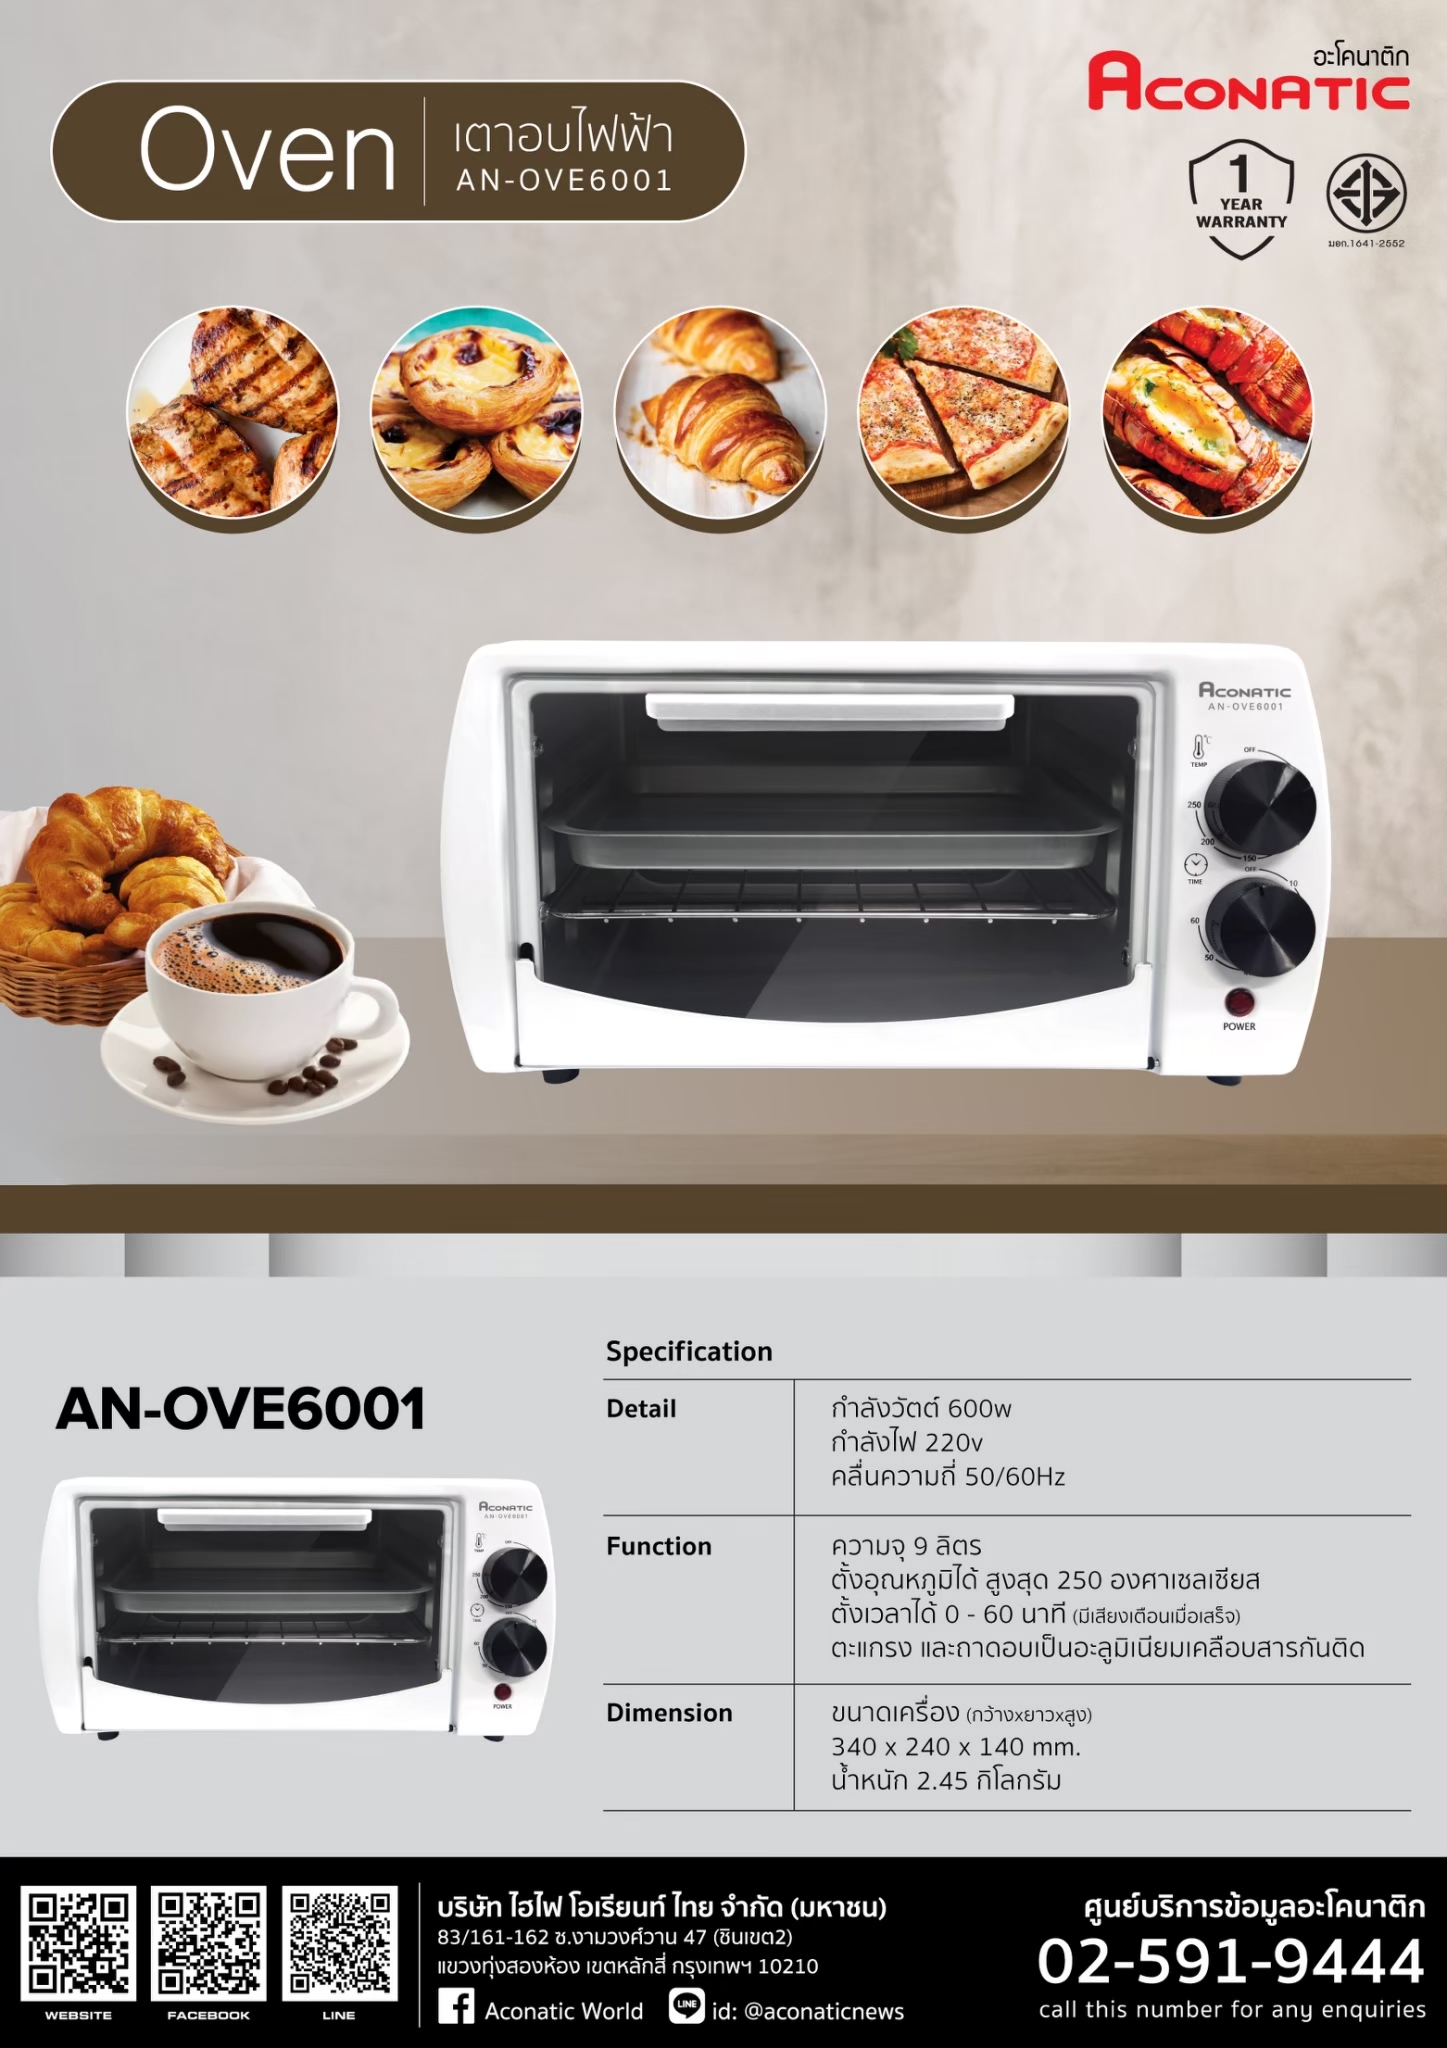 Oven model AN-OVE6001